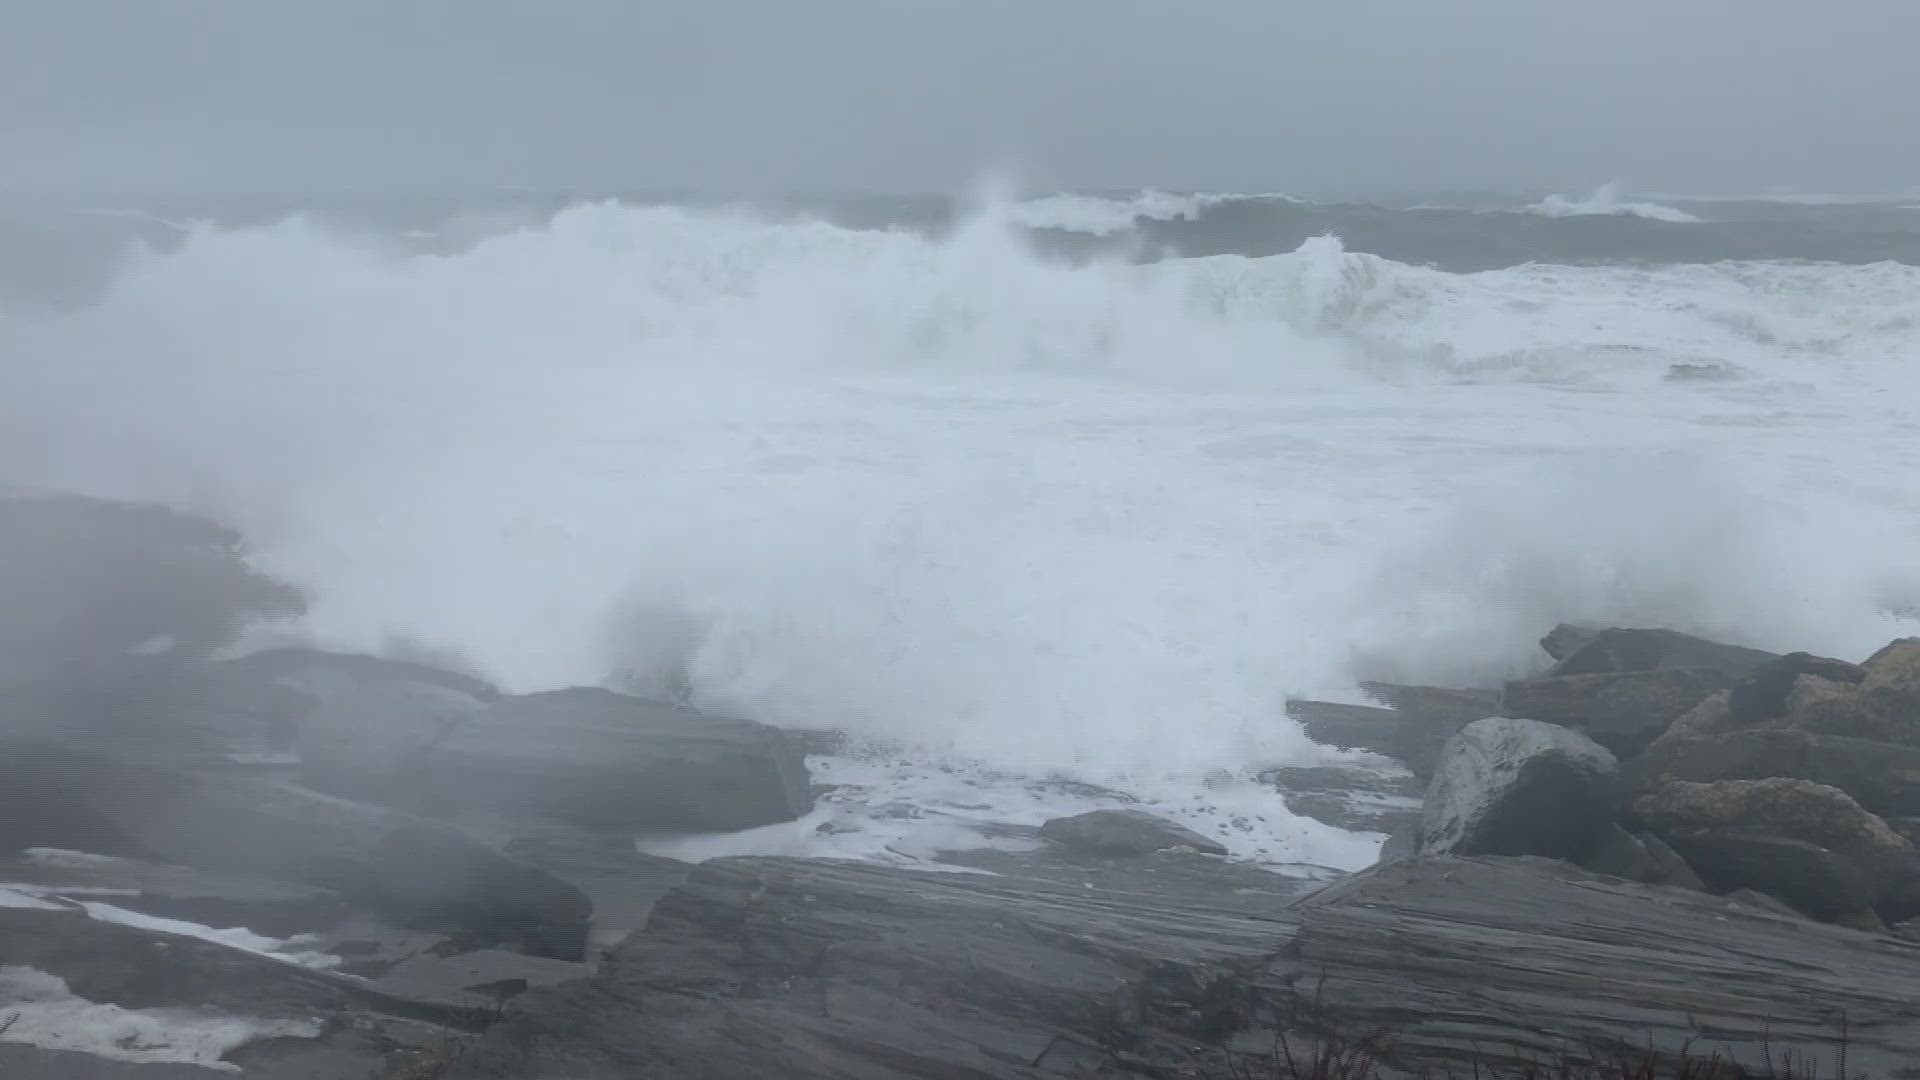 A storm on Monday, Jan. 17, 2022, led to high surf at Two Lights in Cape Elizabeth.